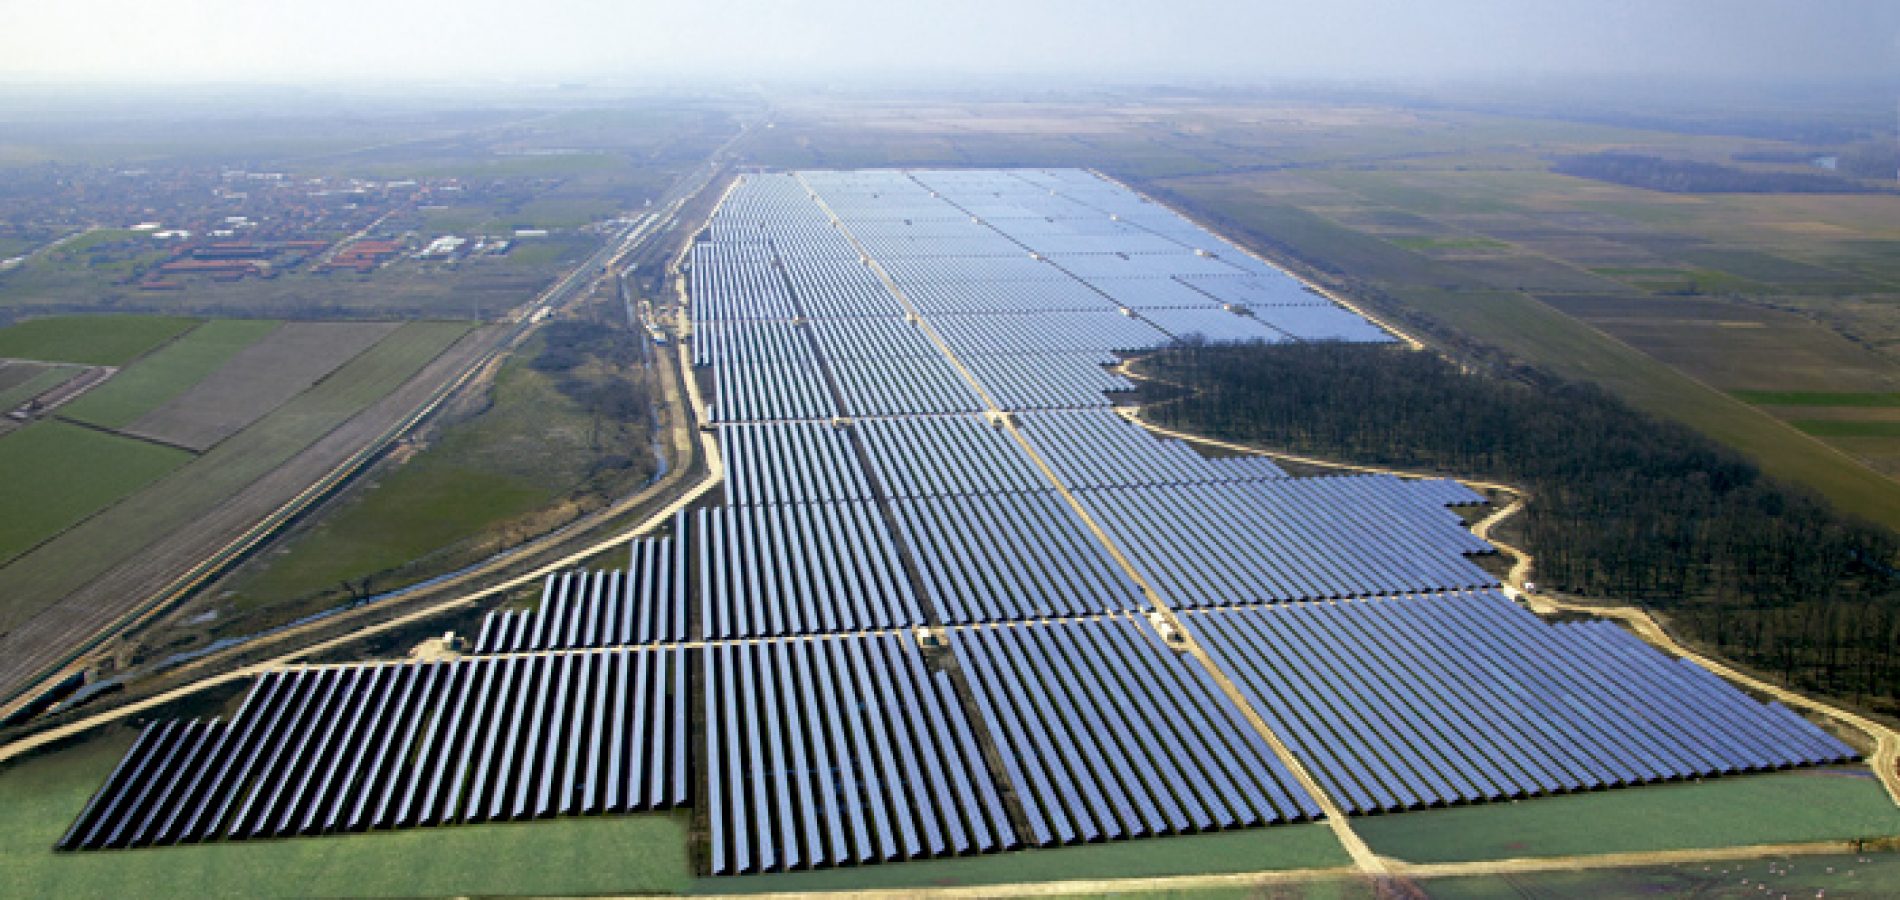 Solar energy installation in Piaui state. (Photo internet reproduction)